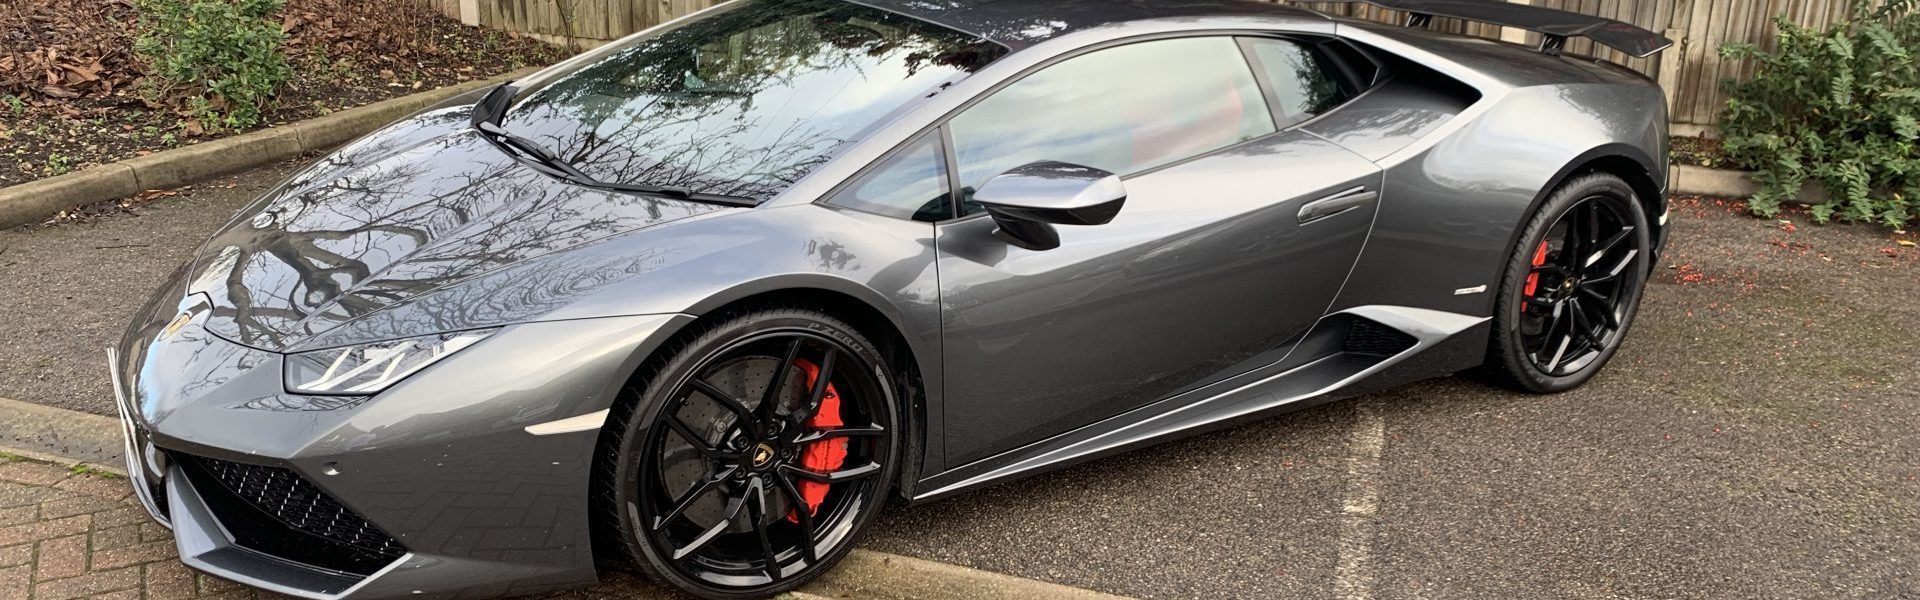 Lamborghini Huracan Upgrades: Rear Wing and Sports Exhaust